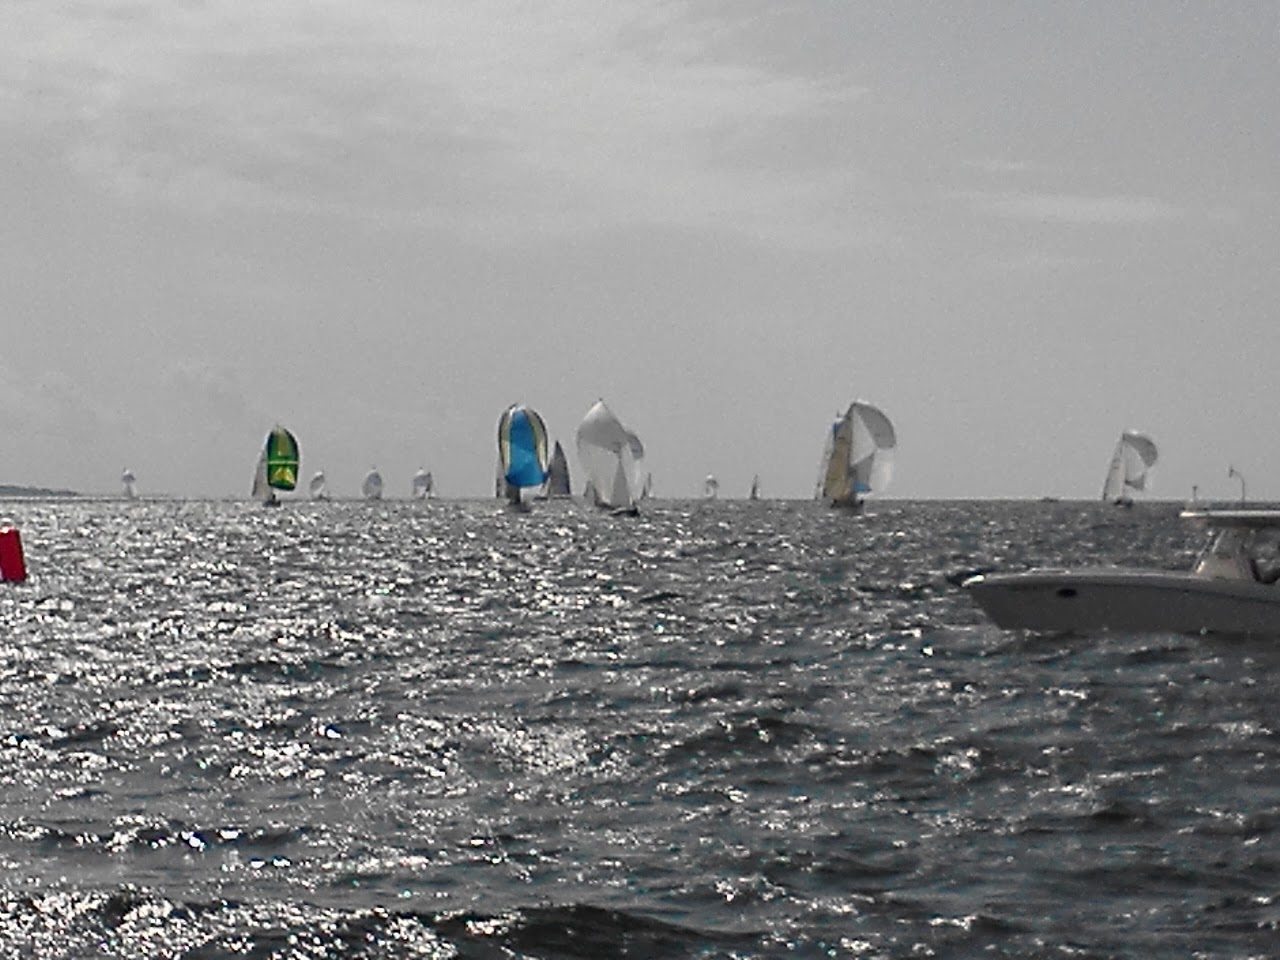 Sailboats with colorful Spinnaker Sails with sunlight sparkling on waves